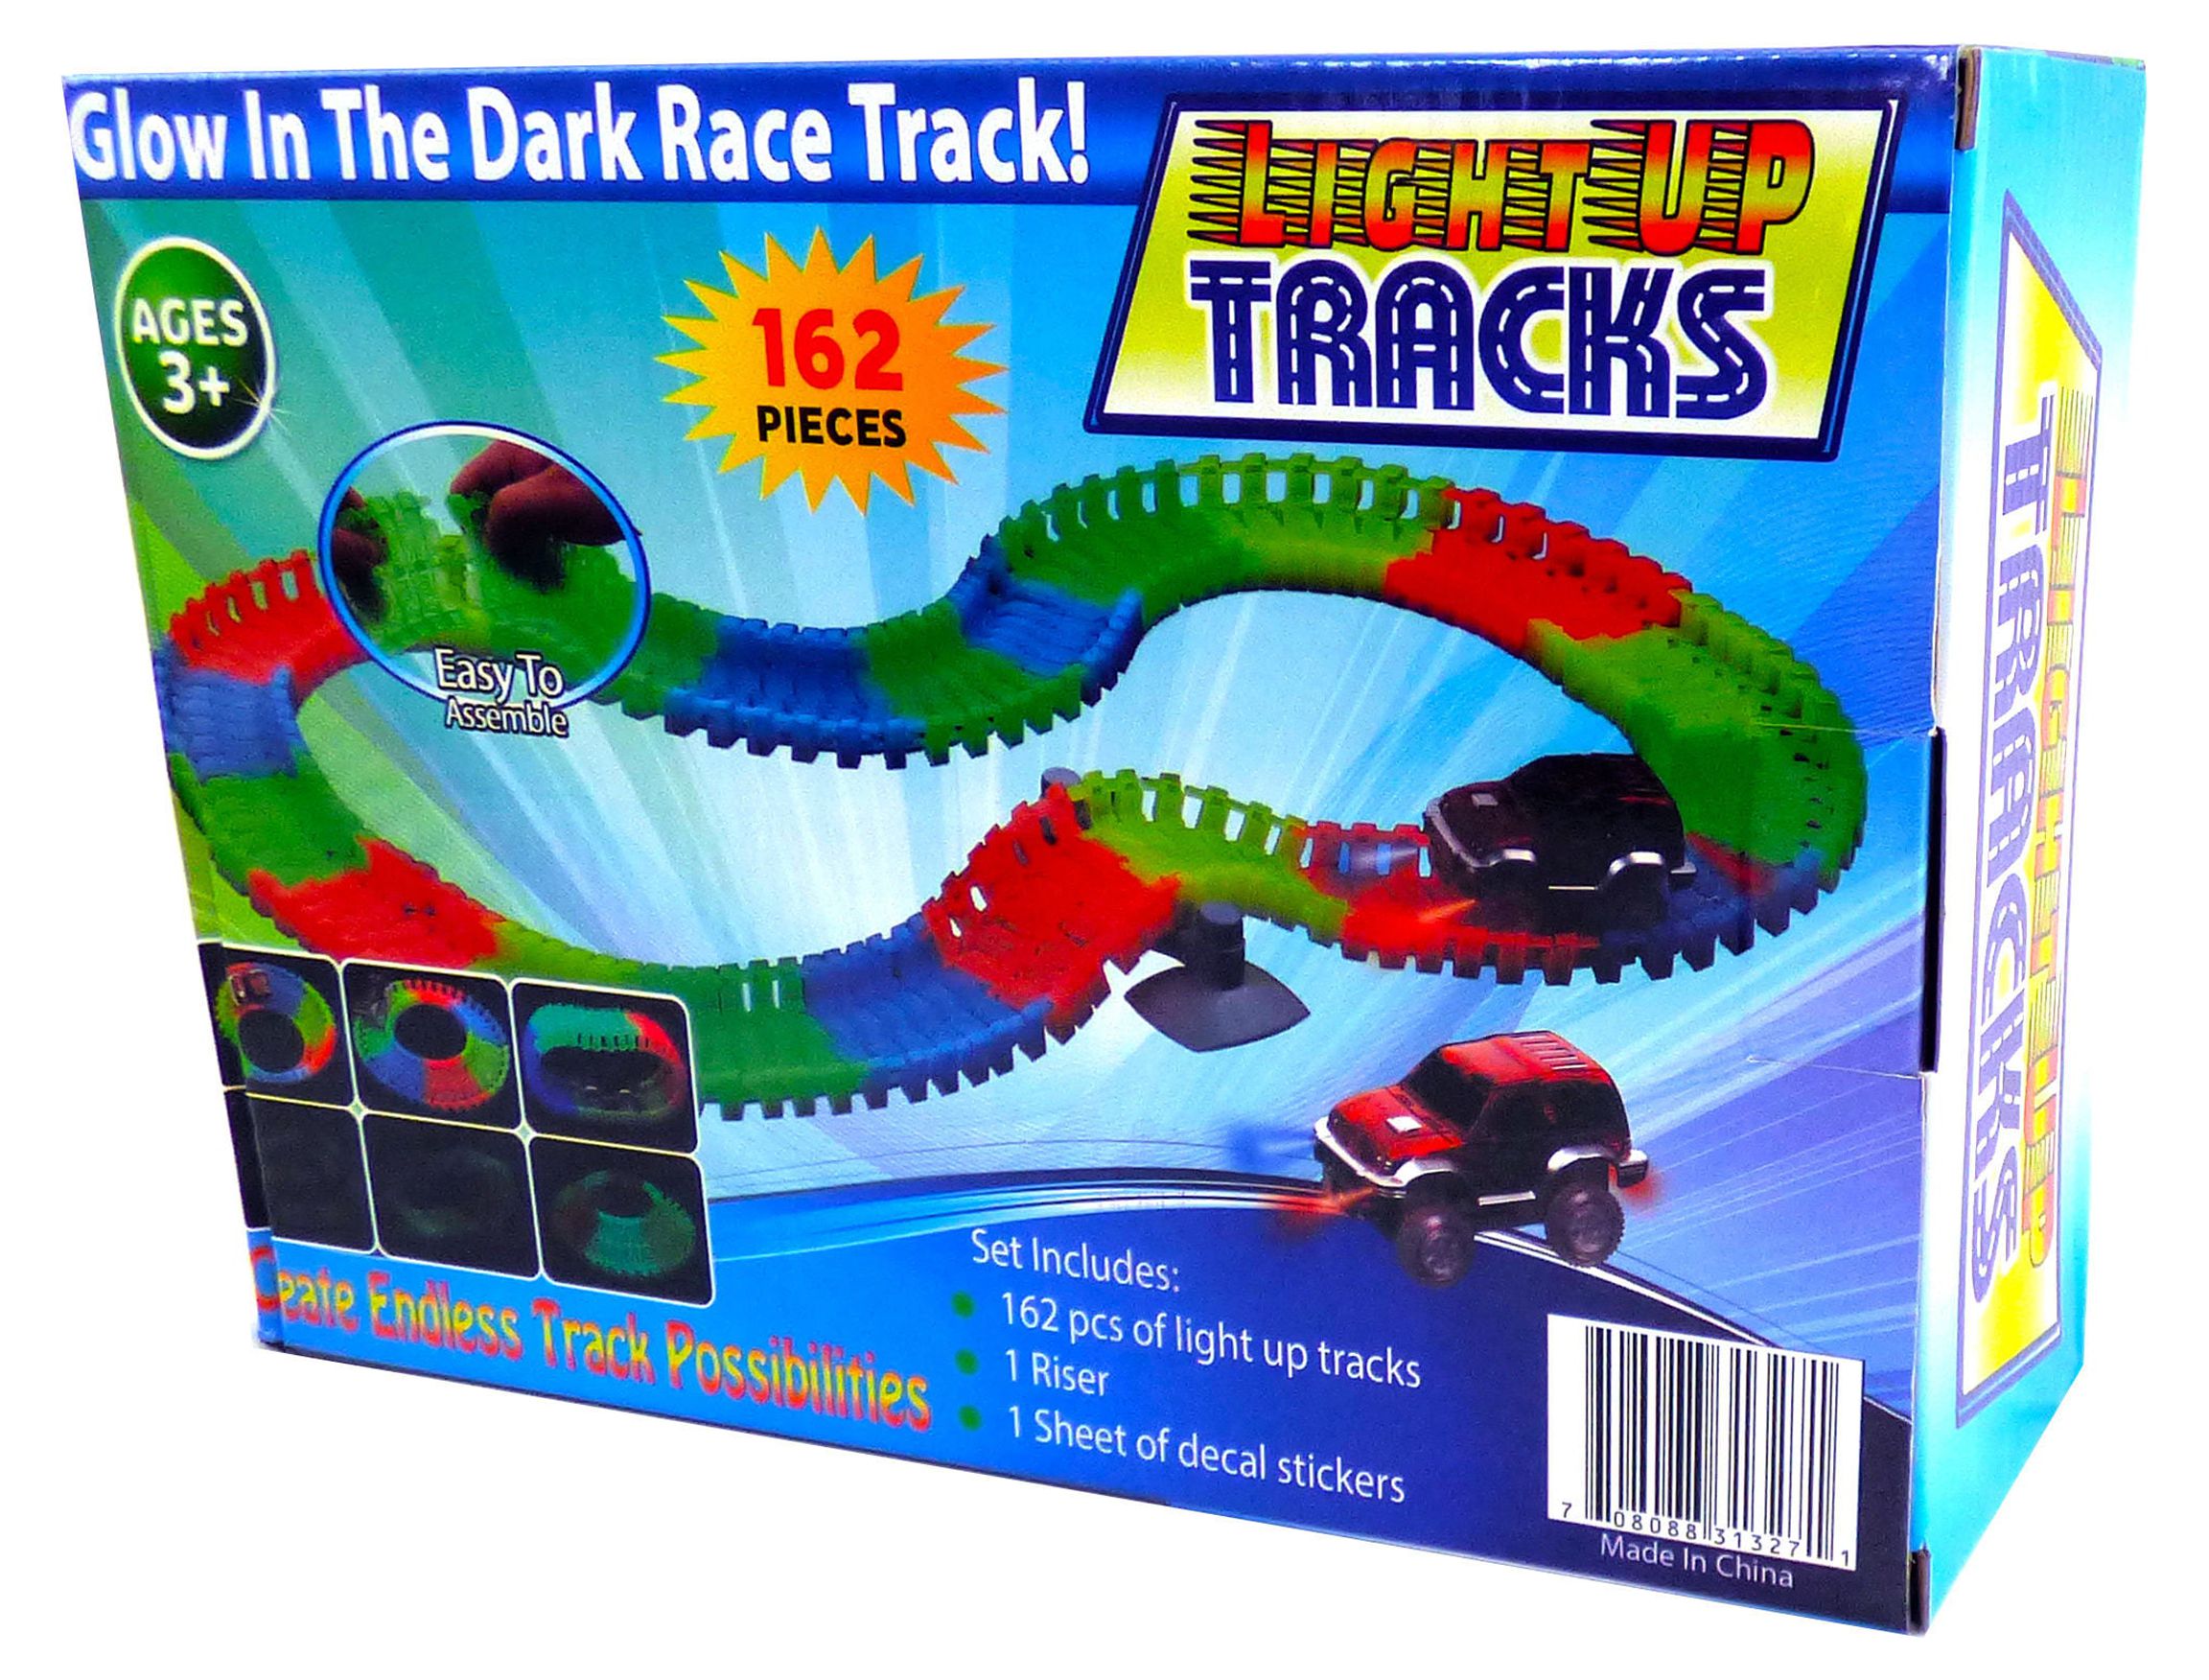 Magical Light Up Twisting Glow In The Dark Race Tracks - Magical Twister Race Track Toy Cars - Endless Glowing Track Possibilities - image 2 of 7